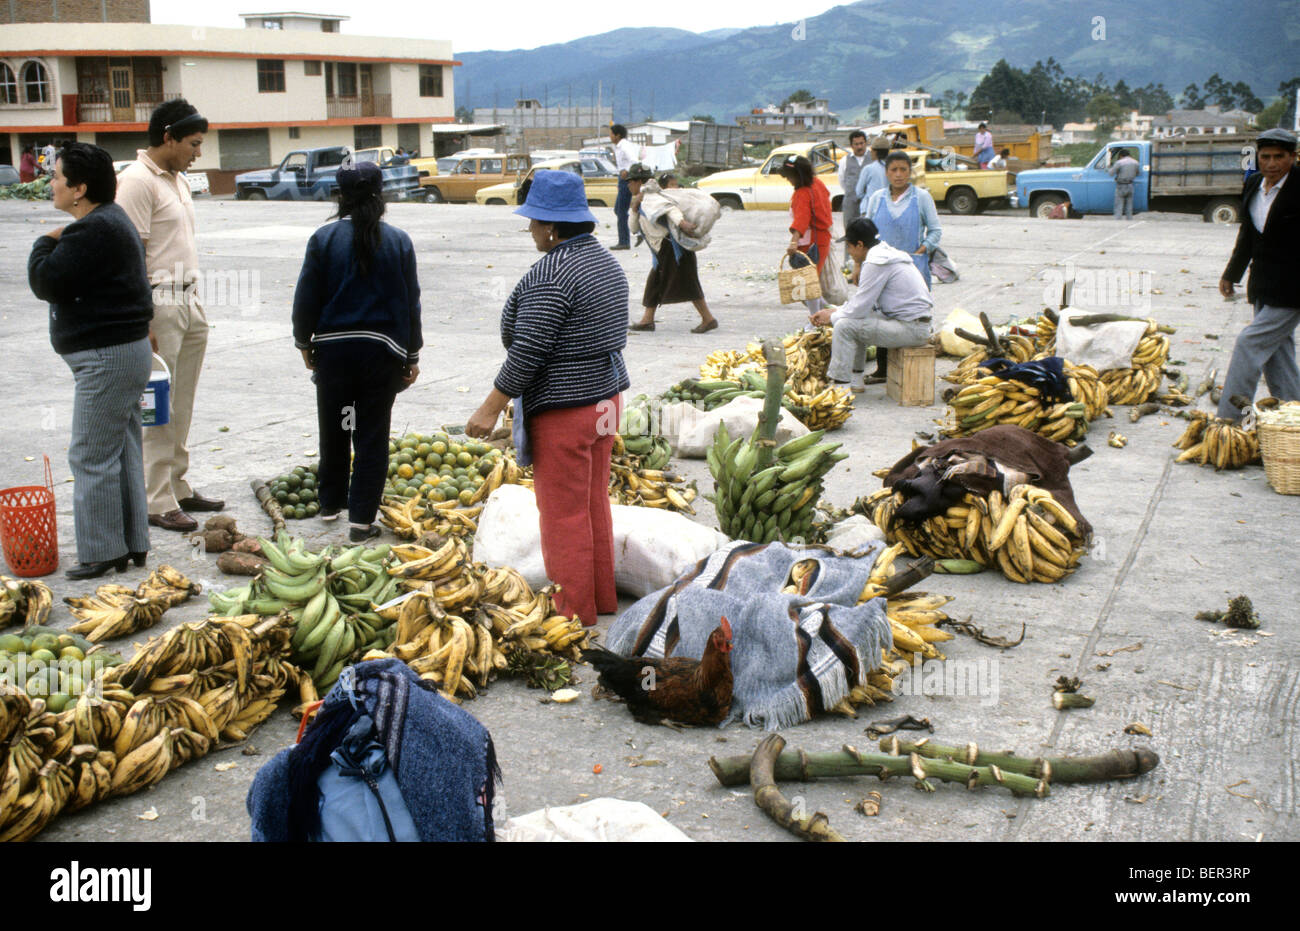 Fruit seller with large quantities of bananas. Local market  upland Ecuador Stock Photo